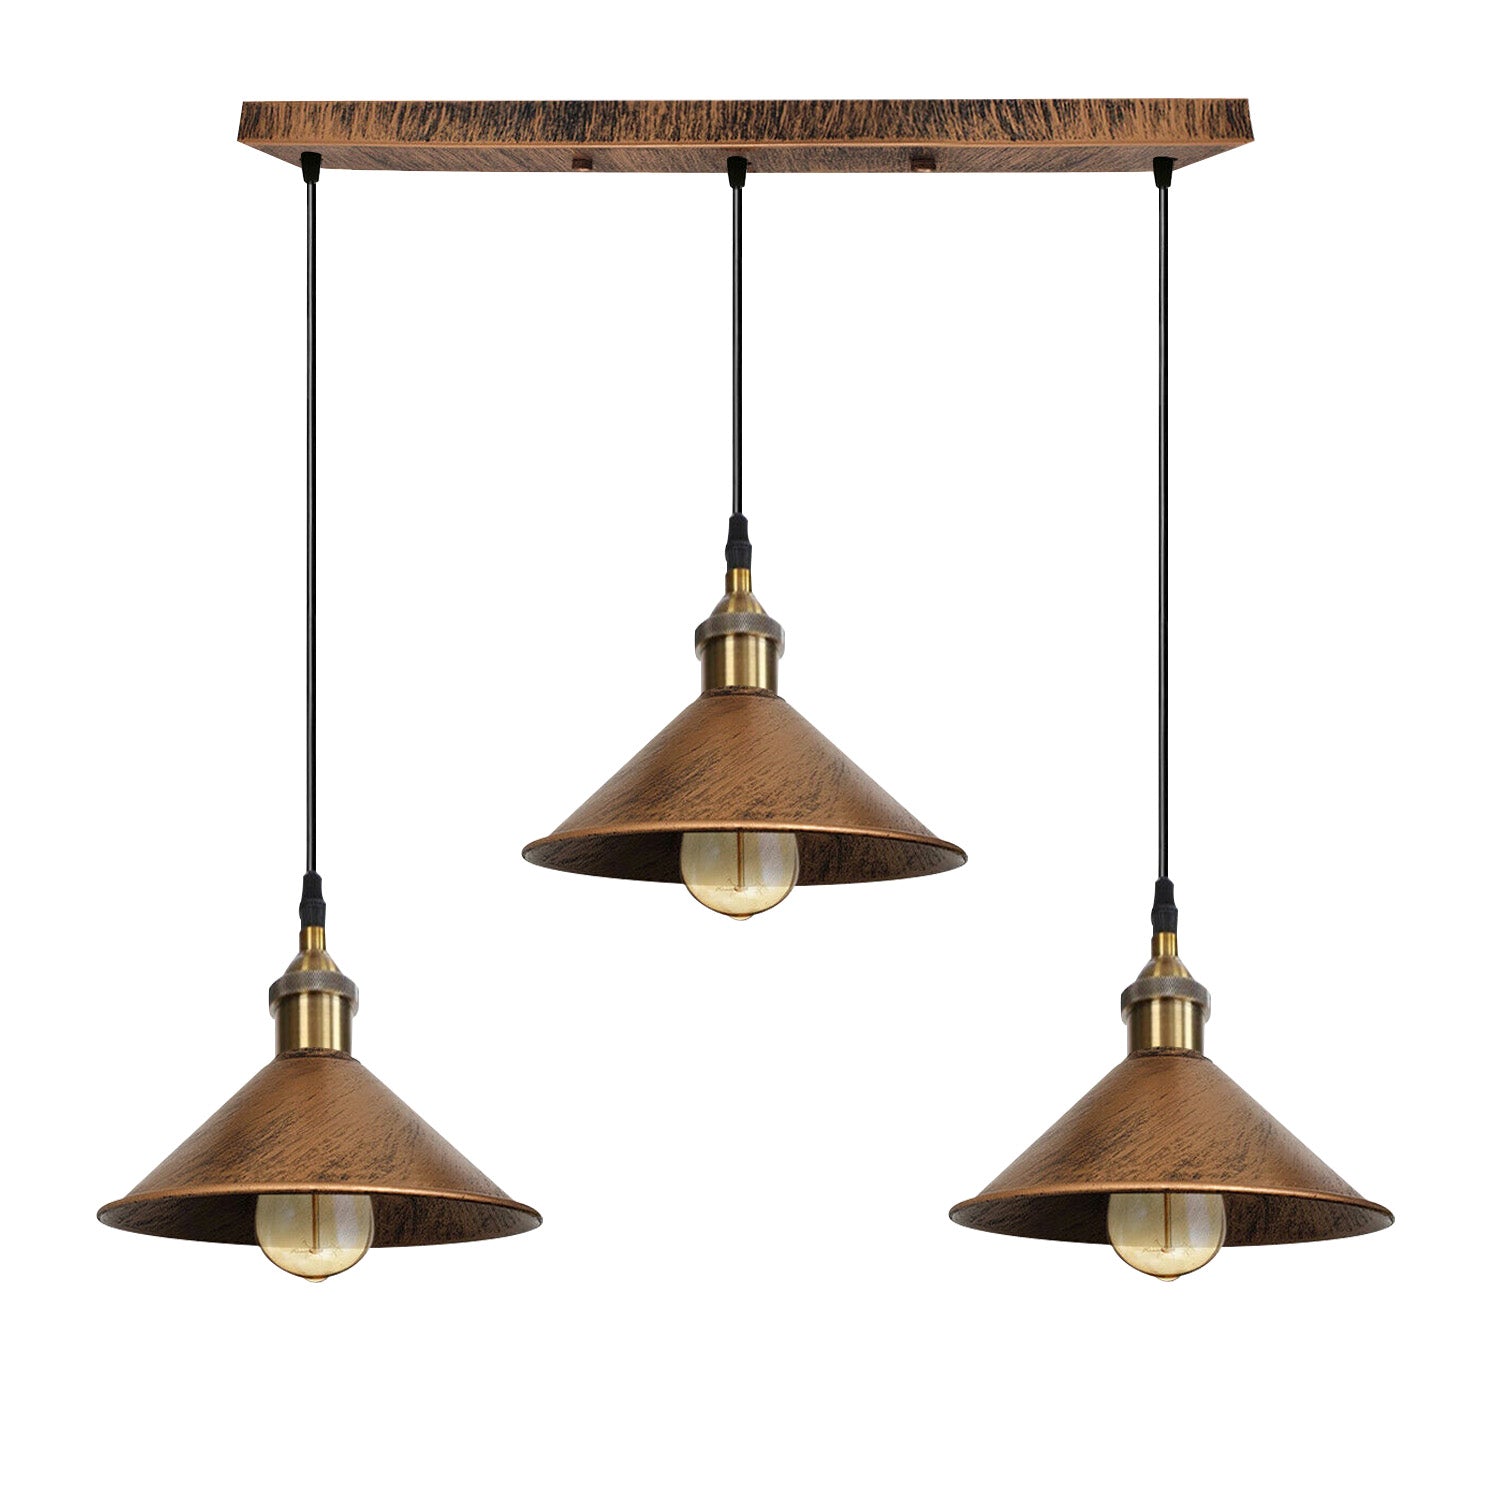 Brushed Copper Industrial 3 Head Metal Cone Shade Pendant Light